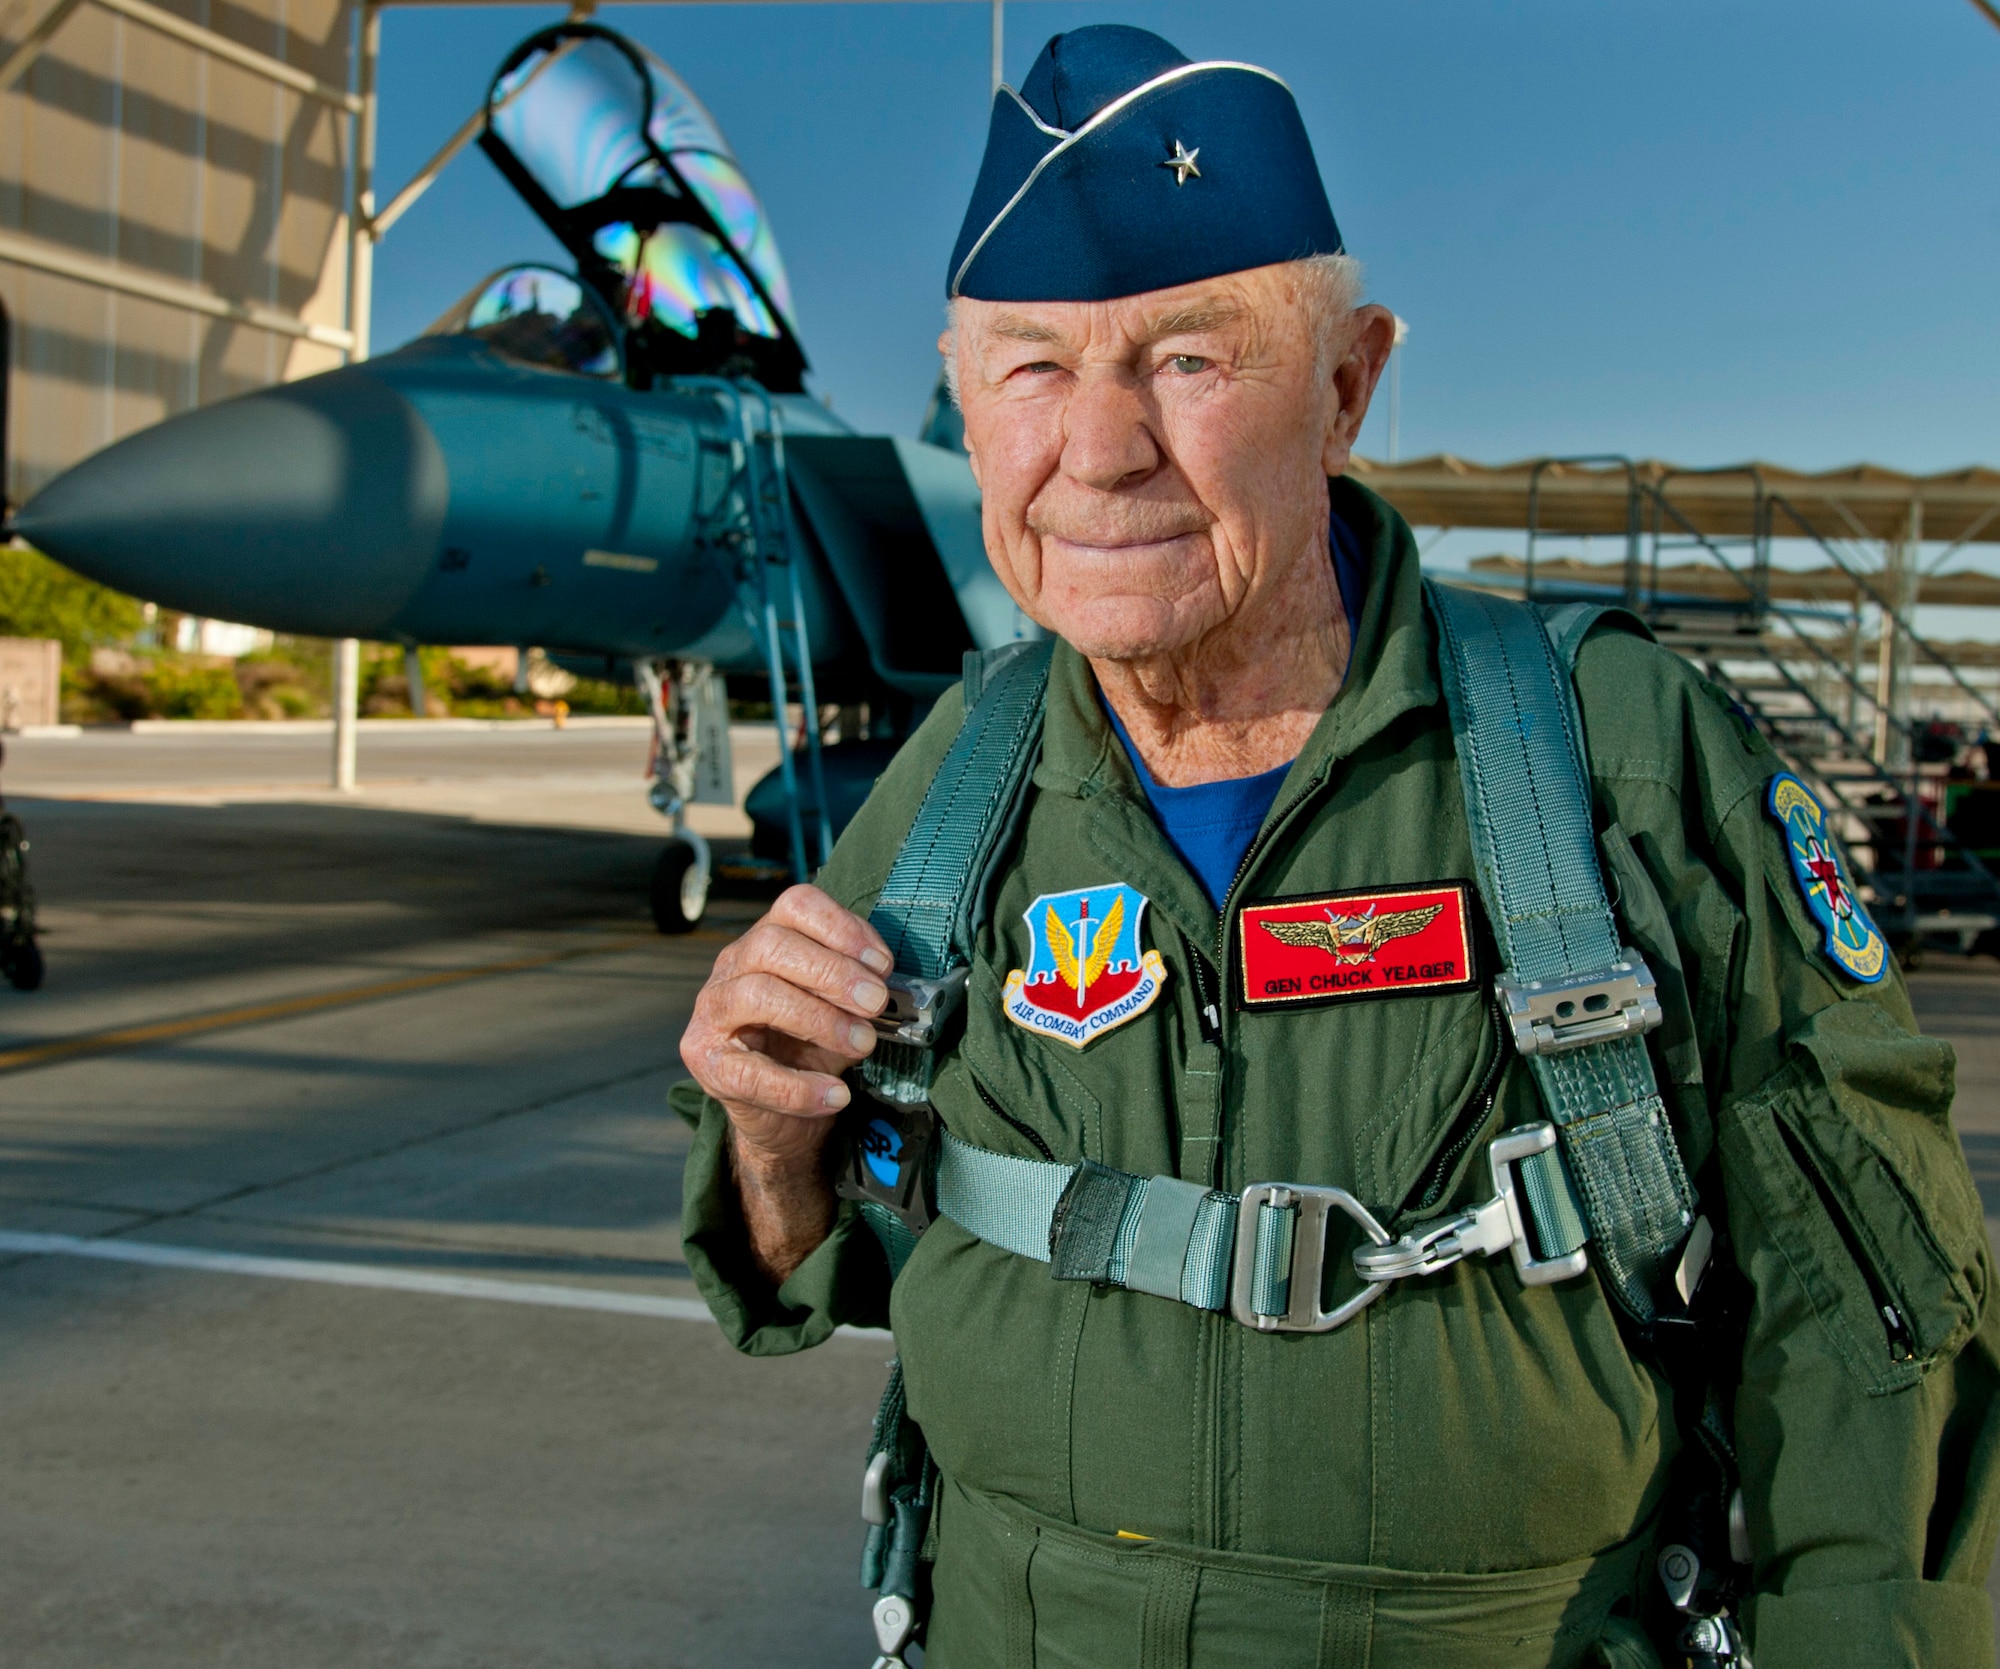 Retired United States Air Force Brig. Gen. Charles E. "Chuck" Yeager prepares to board an F-15D Eagle from the 65th Aggressor Squadron Oct. 14, 2012, at Nellis Air Force Base, Nev. In a jet piloted by Capt. David Vincent, 65th AGRS pilot, Yeager is commemorating the 65th anniversary of his historic breaking of the sound barrier flight Oct. 14, 1947, in the Bell X-1 rocket research plane named "Glamorous Glennis." Yeager was awarded the prestigious Collier Trophy in 1948 for this landmark aeronautical achievement. (U.S. Air Force photo by Master Sgt. Jason W. Edwards)
